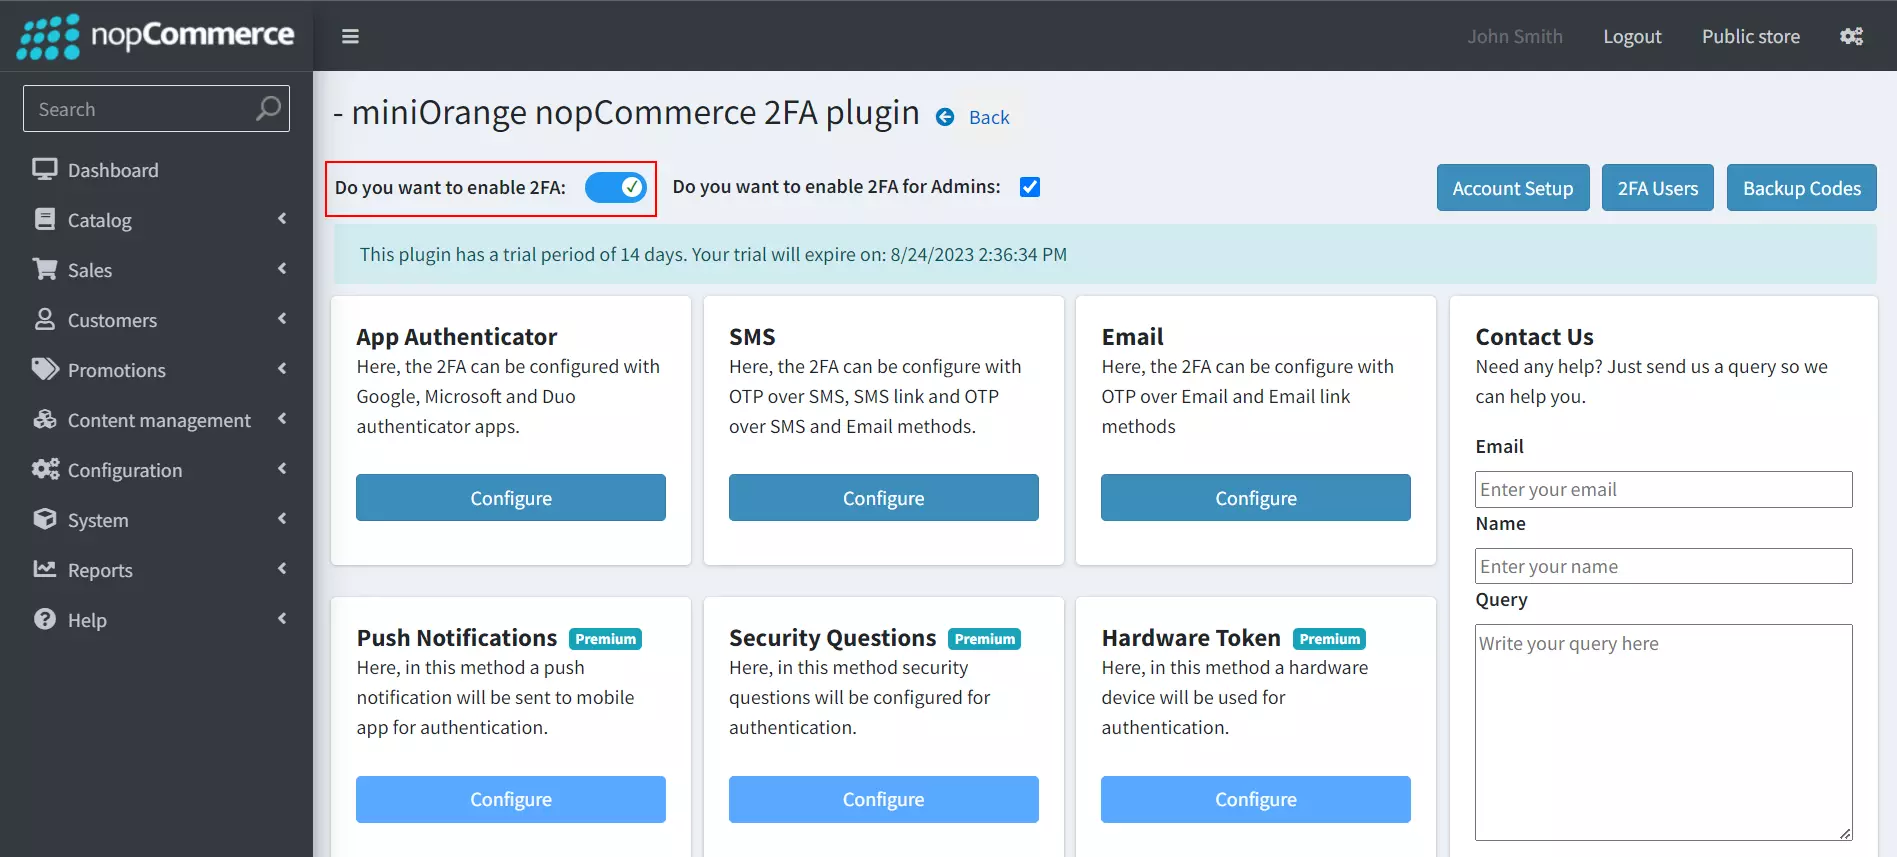 nopCommerce Two-factor Authentication using Google Authenticator | nopCommerce 2FA - Enable nopCommerce 2FA for users